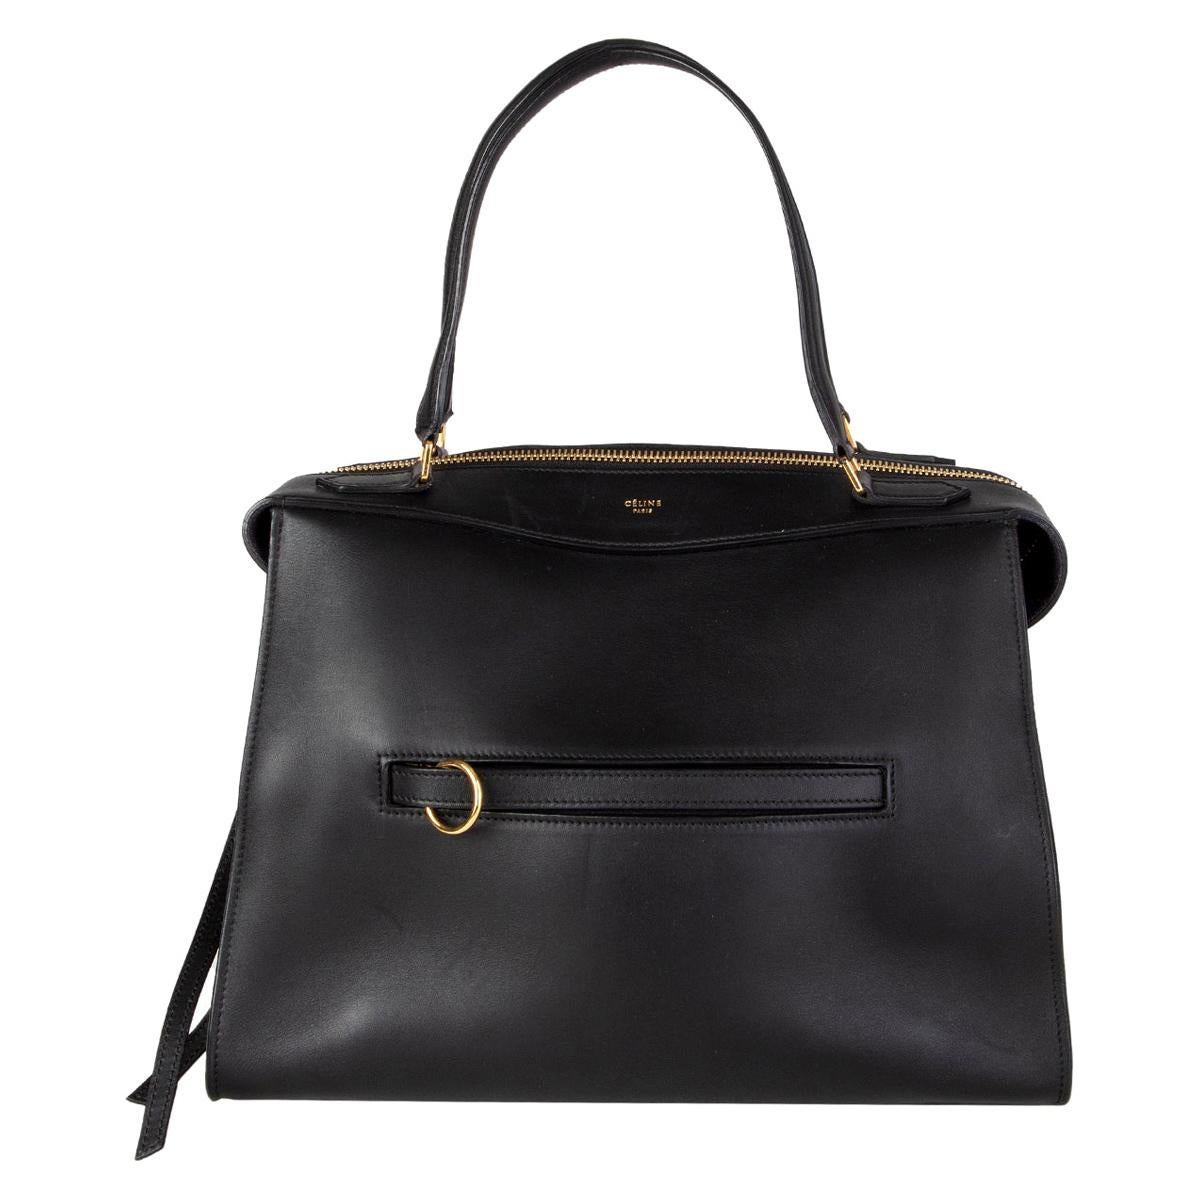 CELINE black leather RING SMALL Top Handle Bag